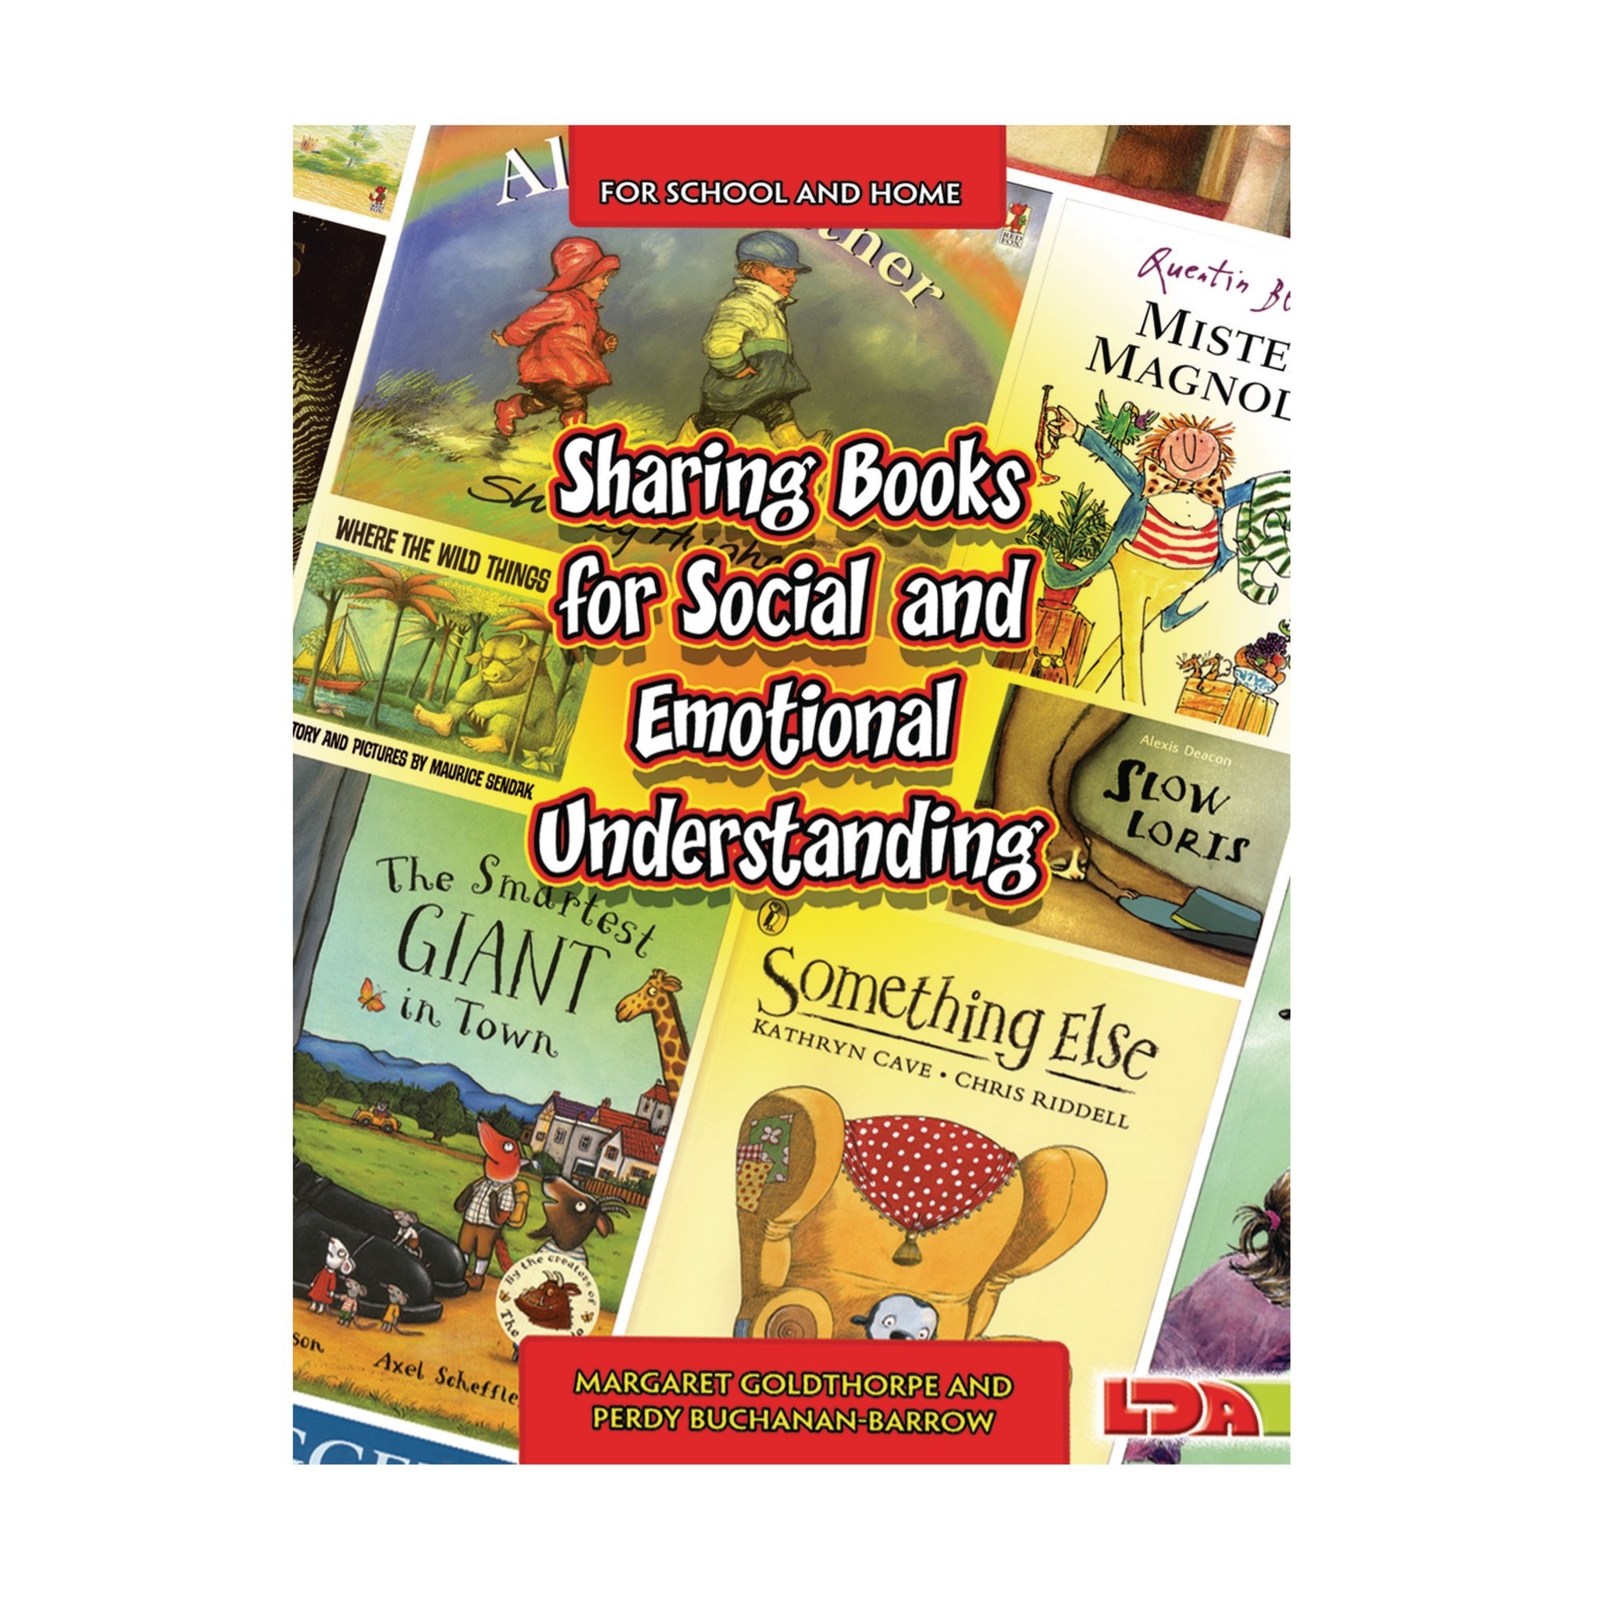 Sharing Books for Social and Emotional Understanding